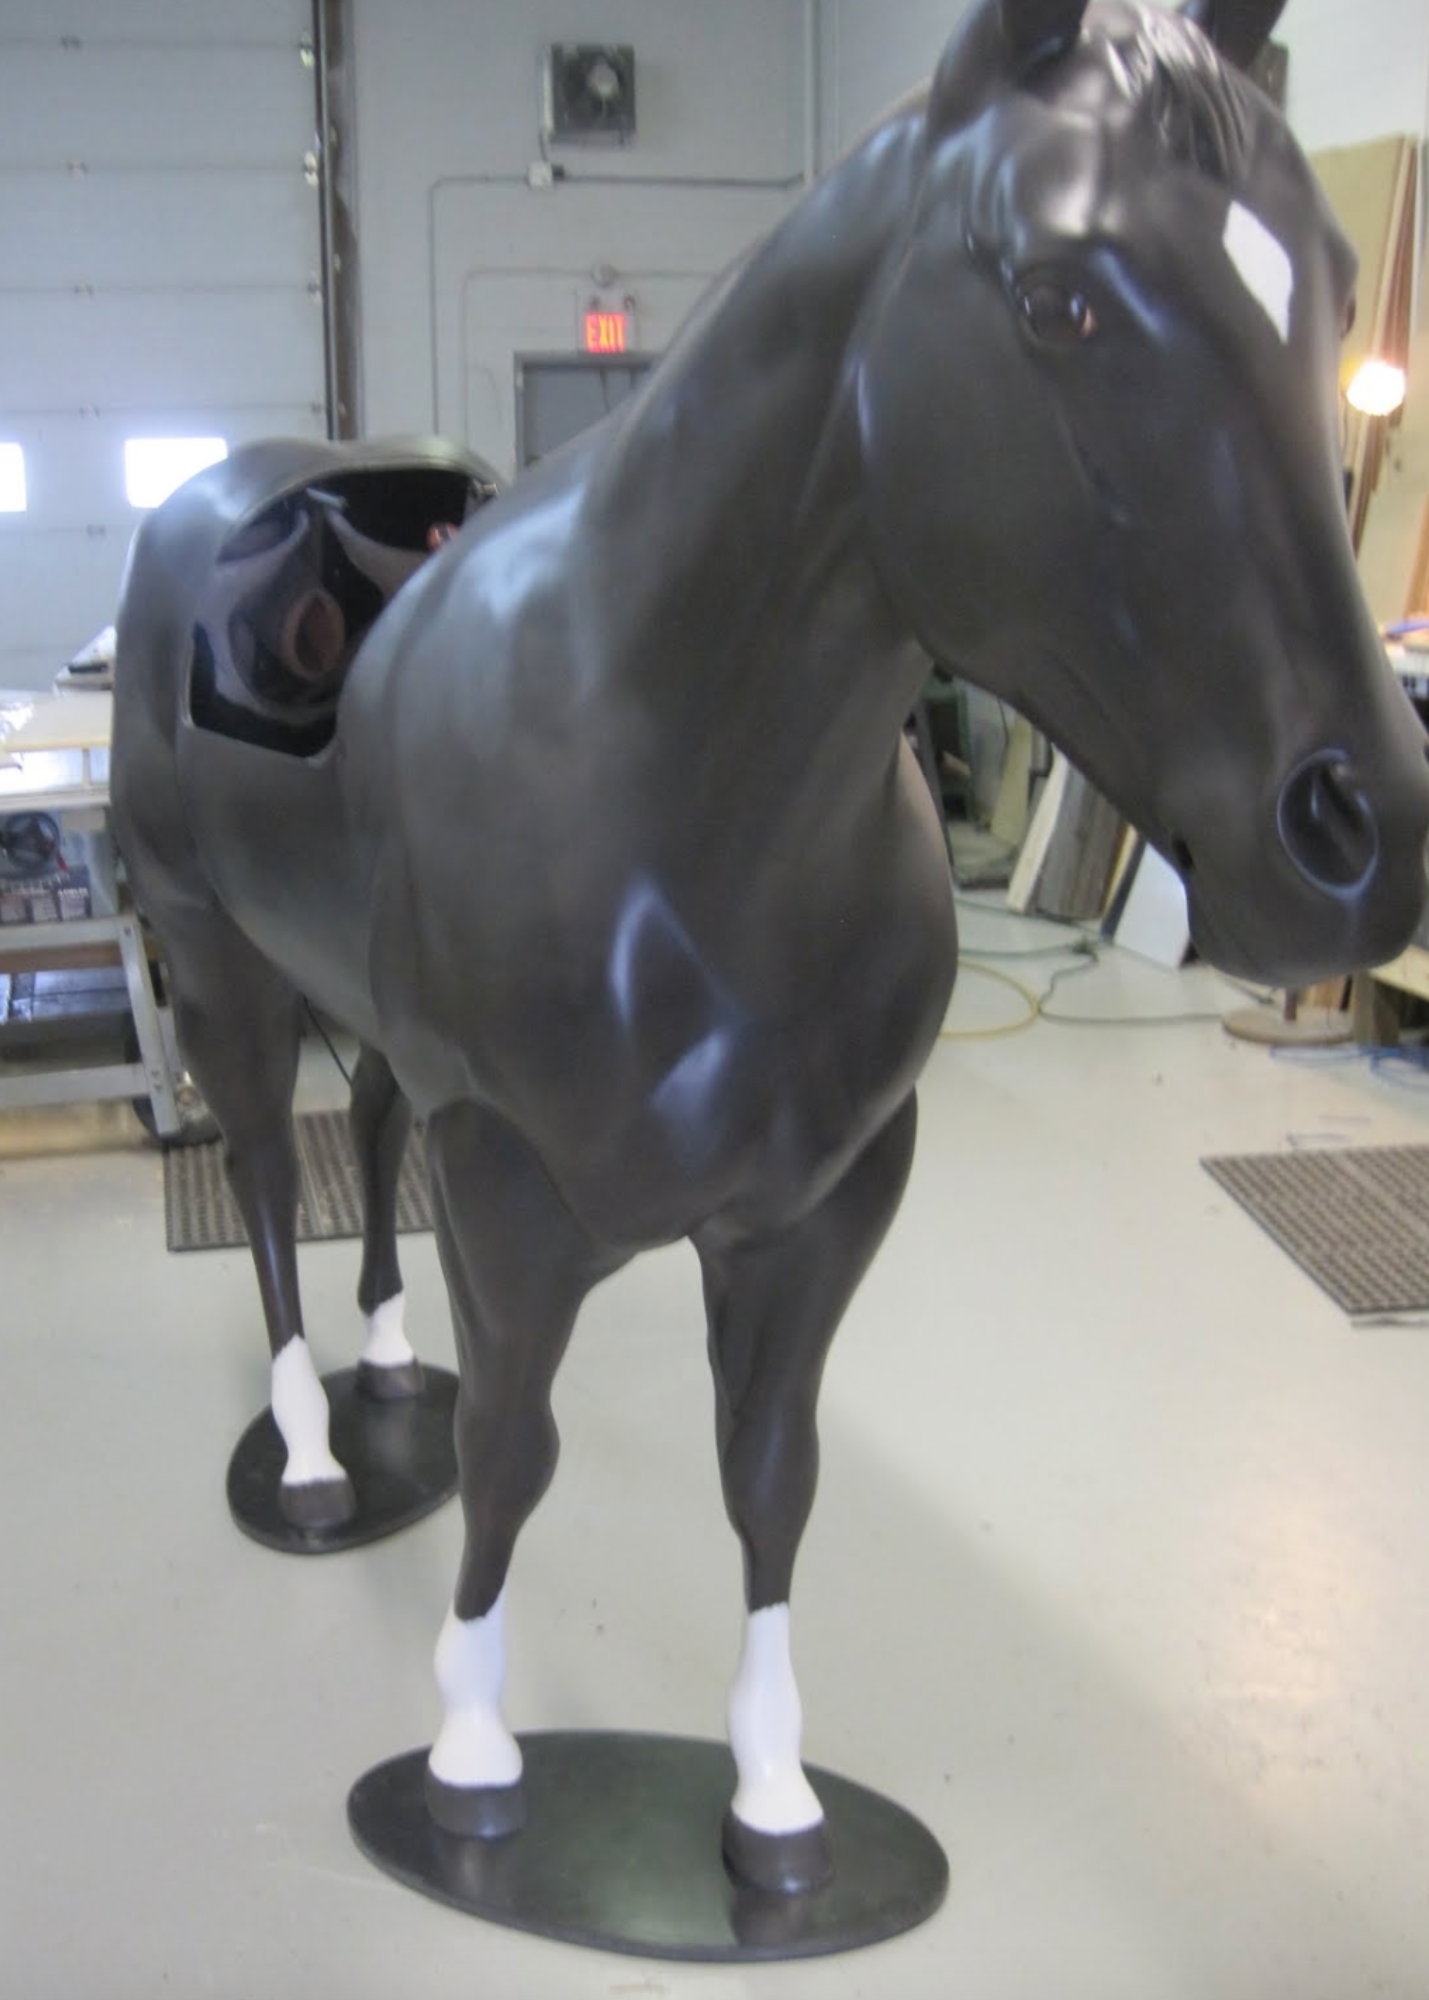 The equine model with finished paint.